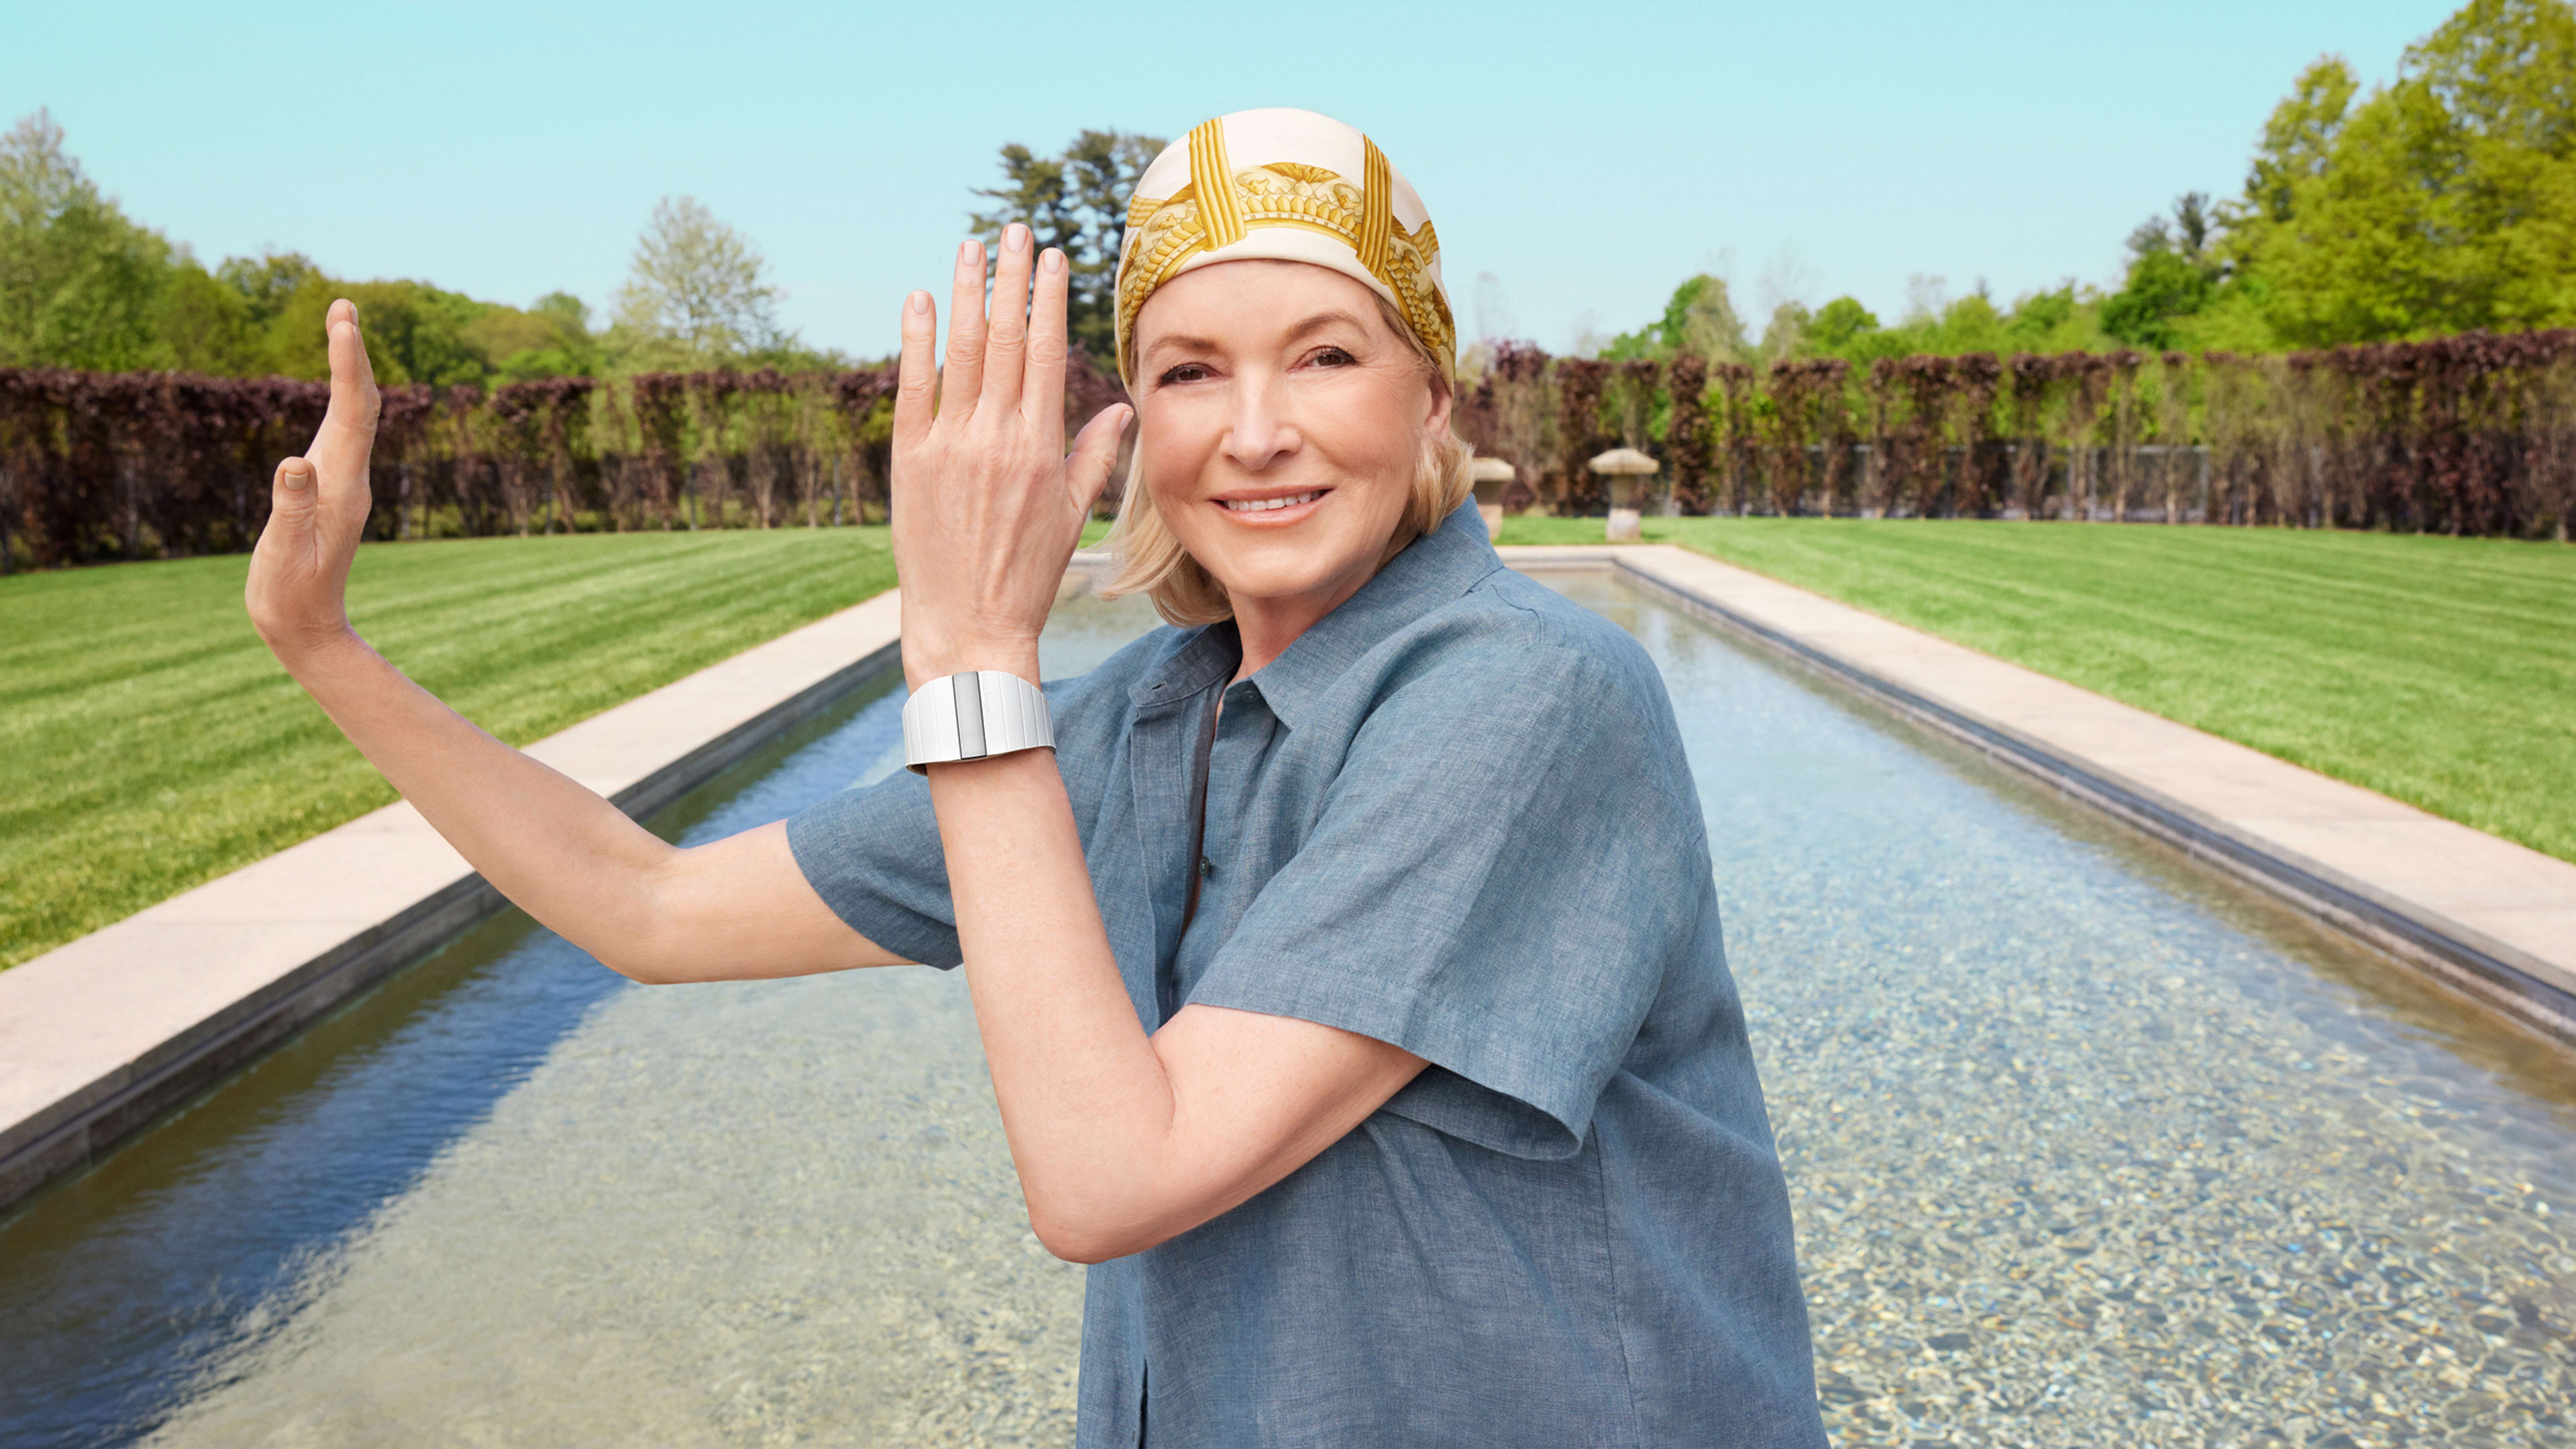 This Martha Stewart-backed wearable wants to encourage active aging